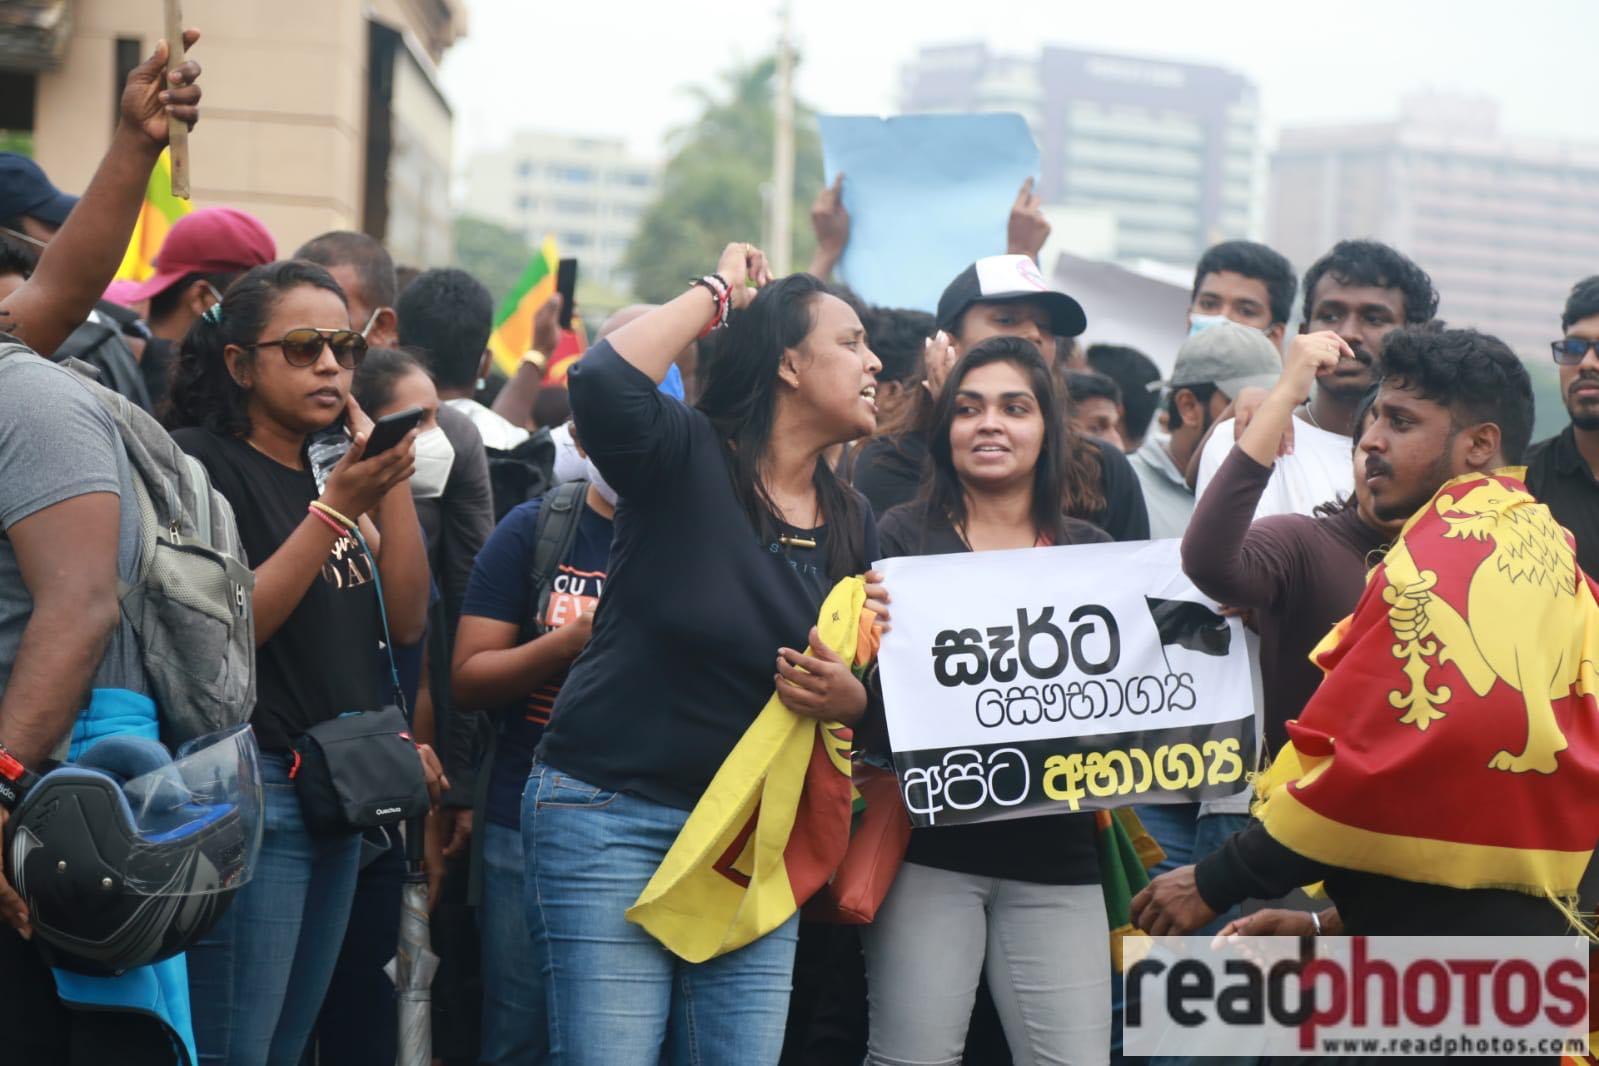 Sri Lankans protests against the government - Galle Face 10.04.2022 - Read Photos